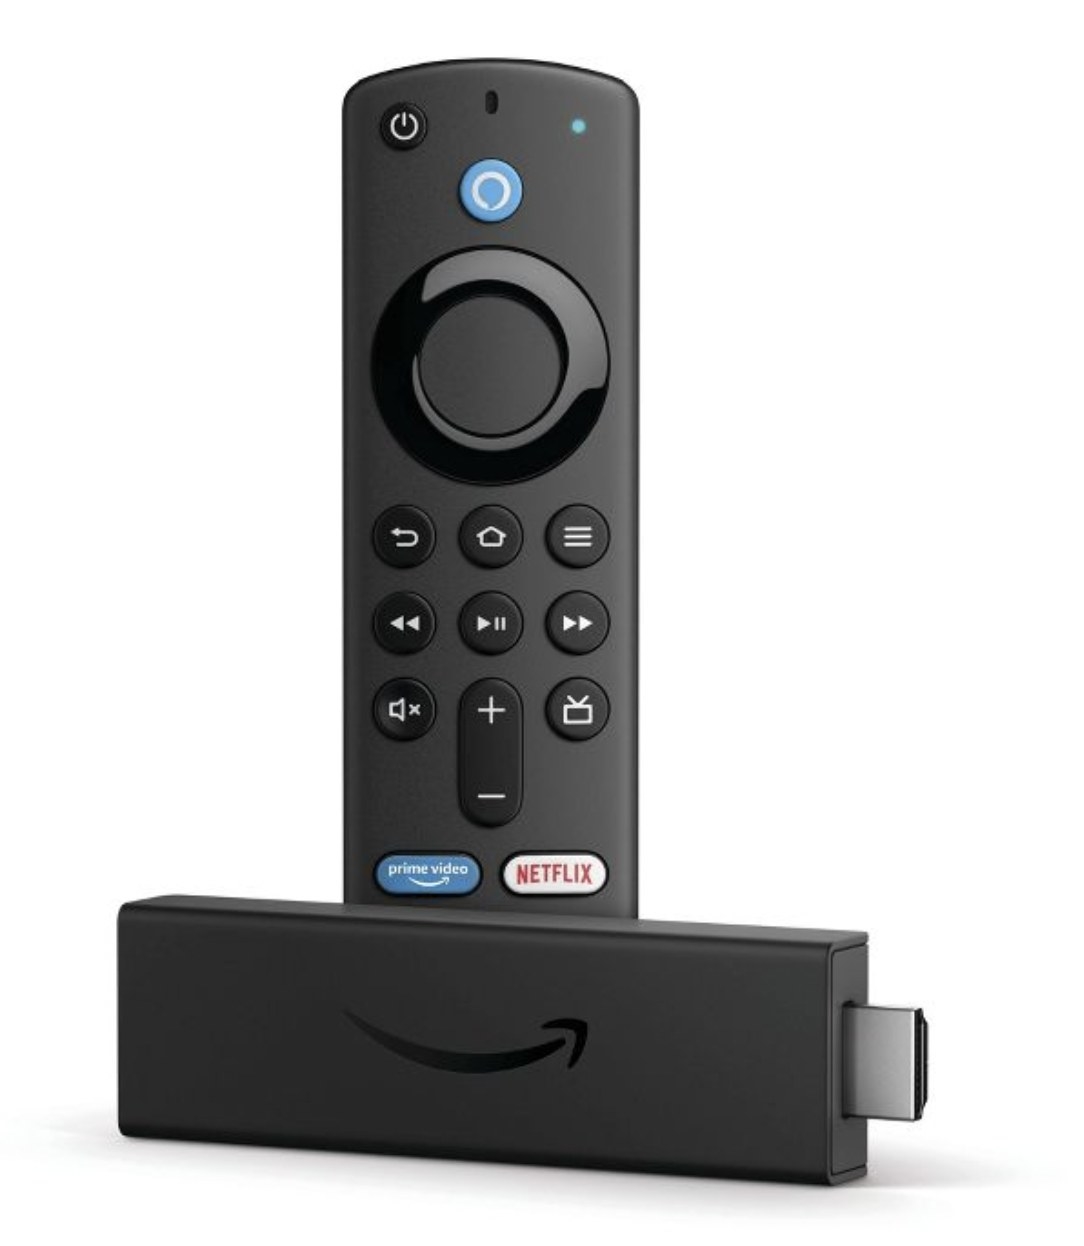 The Fire stick and remote